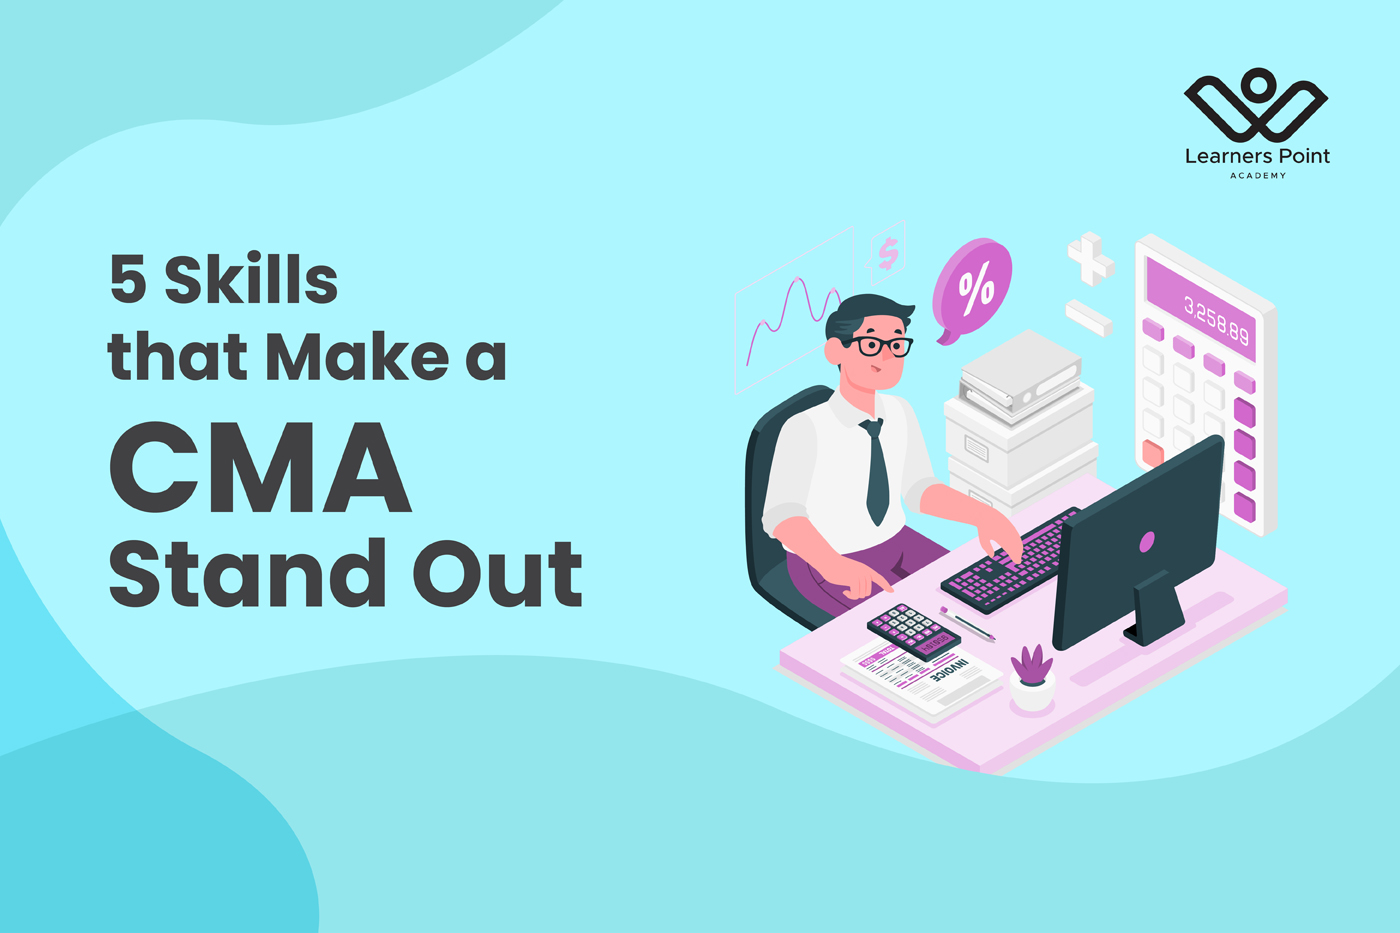 5 Essential Skills that Make a CMA Stand Out